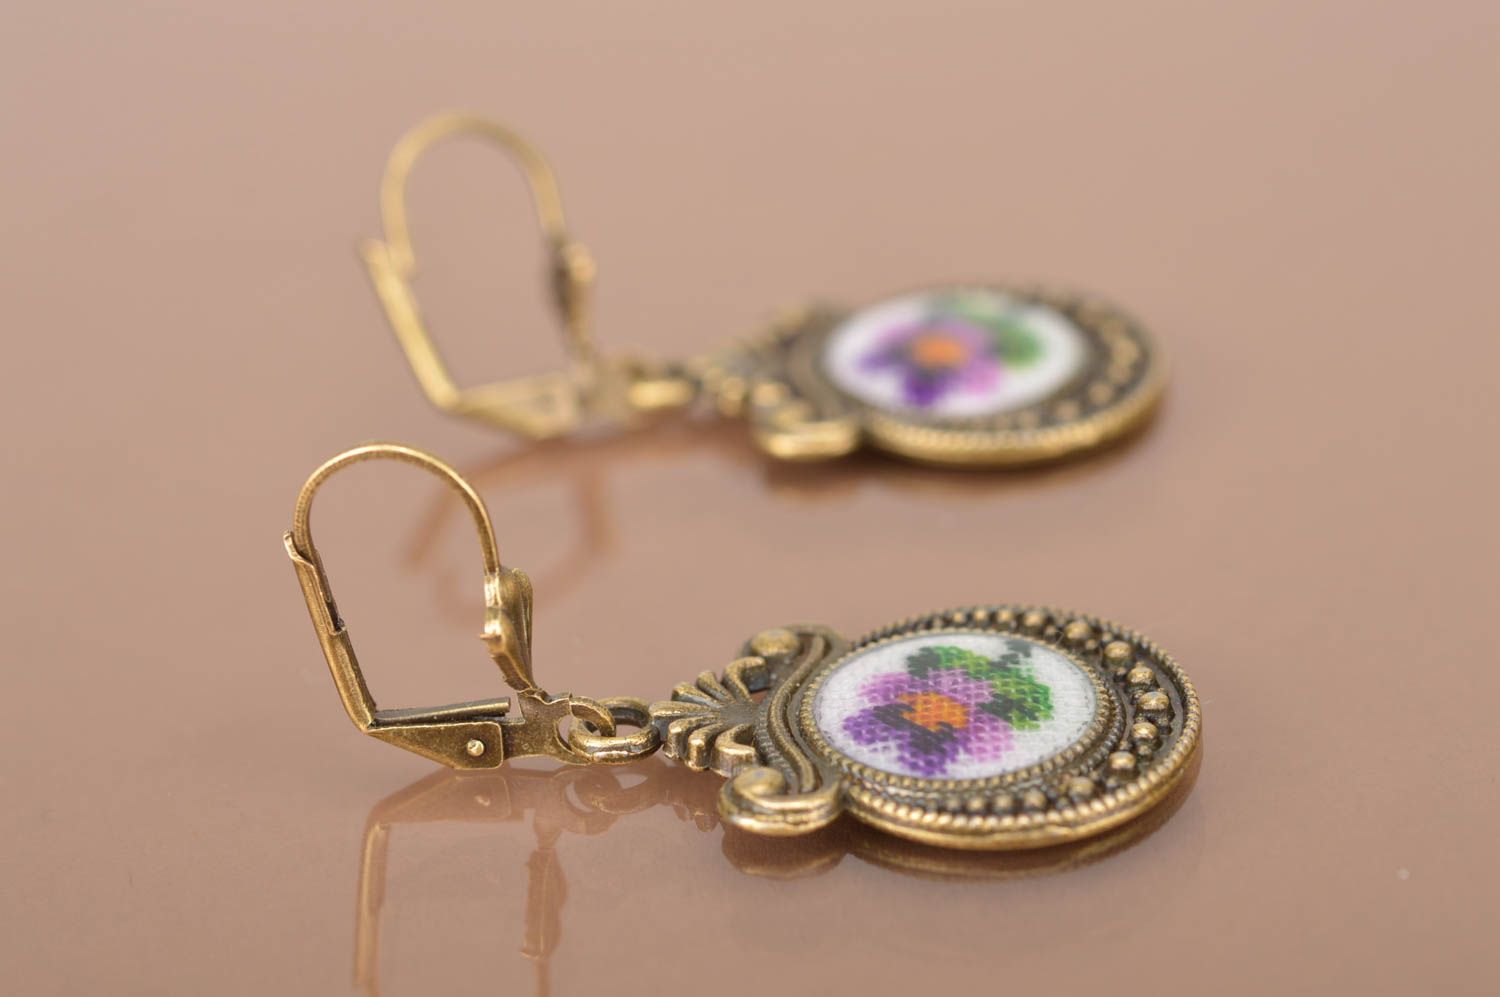 Fashion earrings homemade jewelry metal jewelry designer accessories cool gifts photo 4